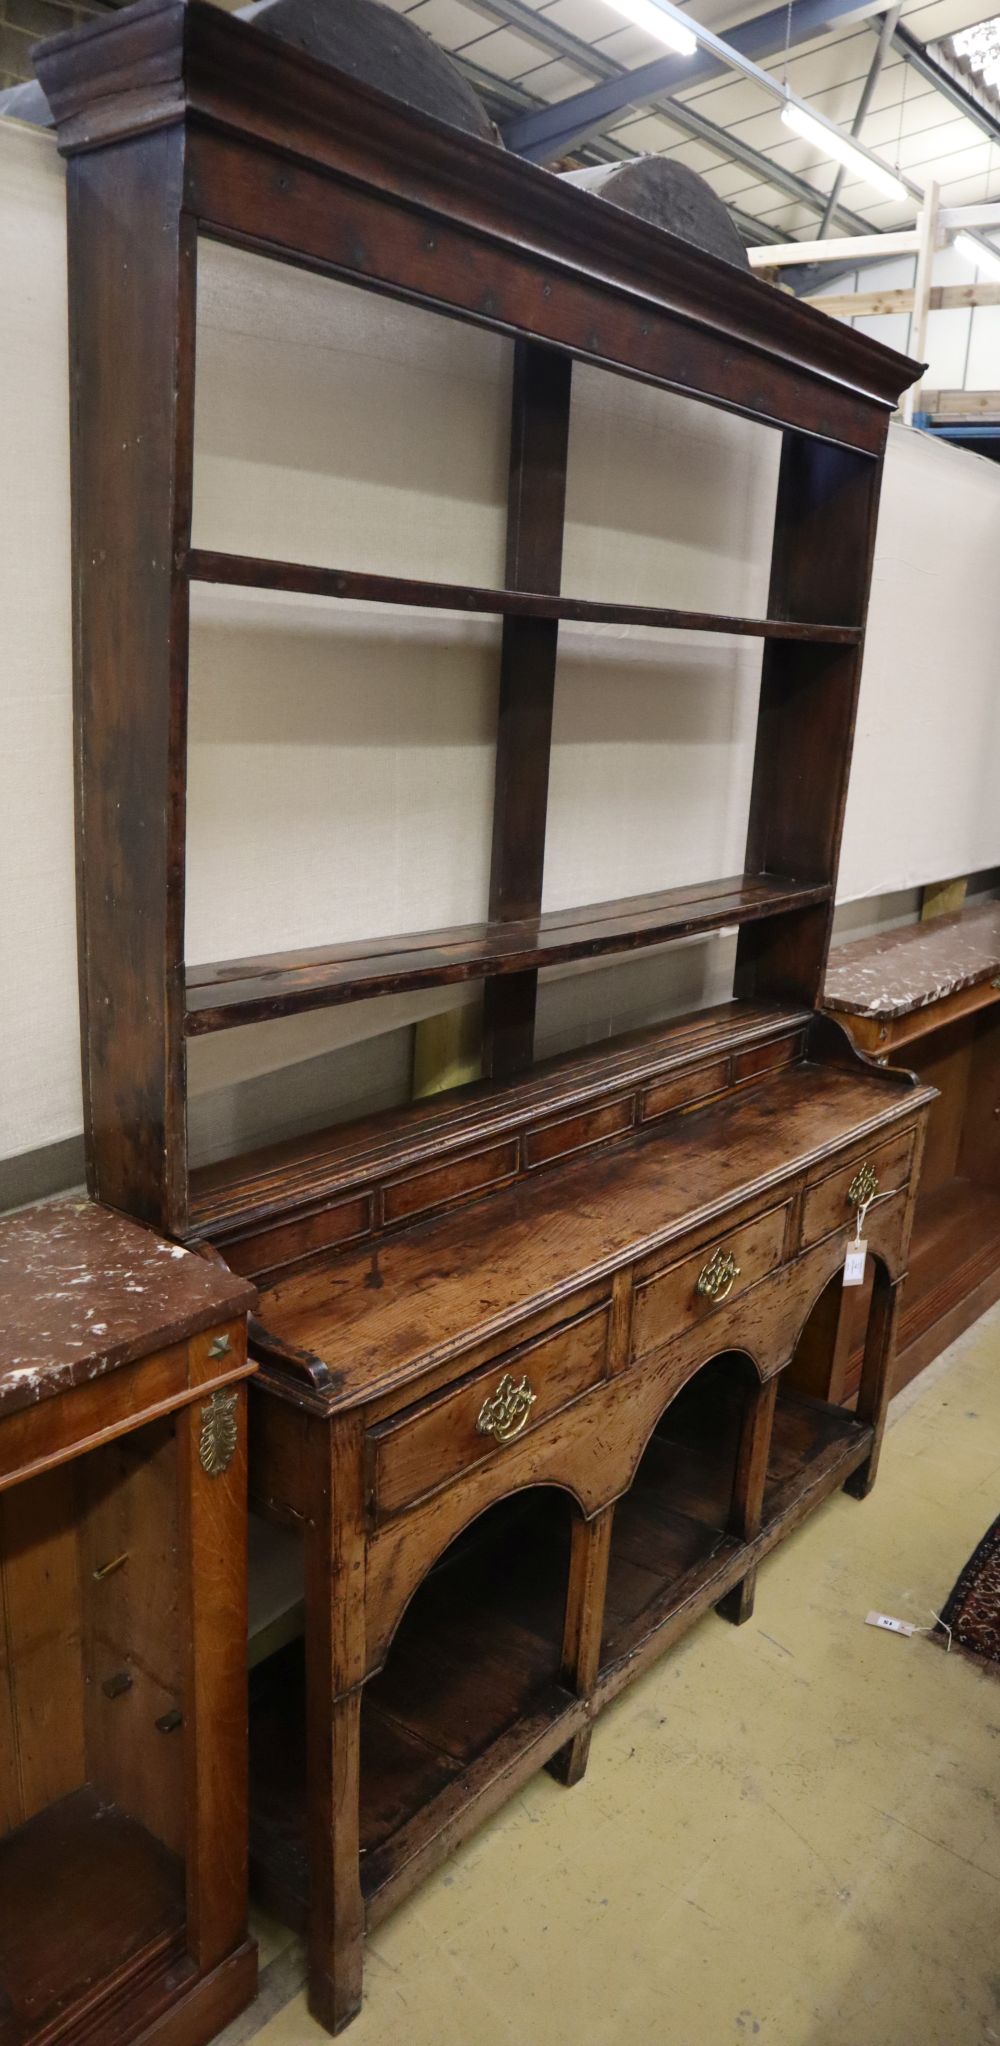 A small George III and later oak dresser, W.125cm, D.36cm, H.184cmCONDITION: Overall a very nice